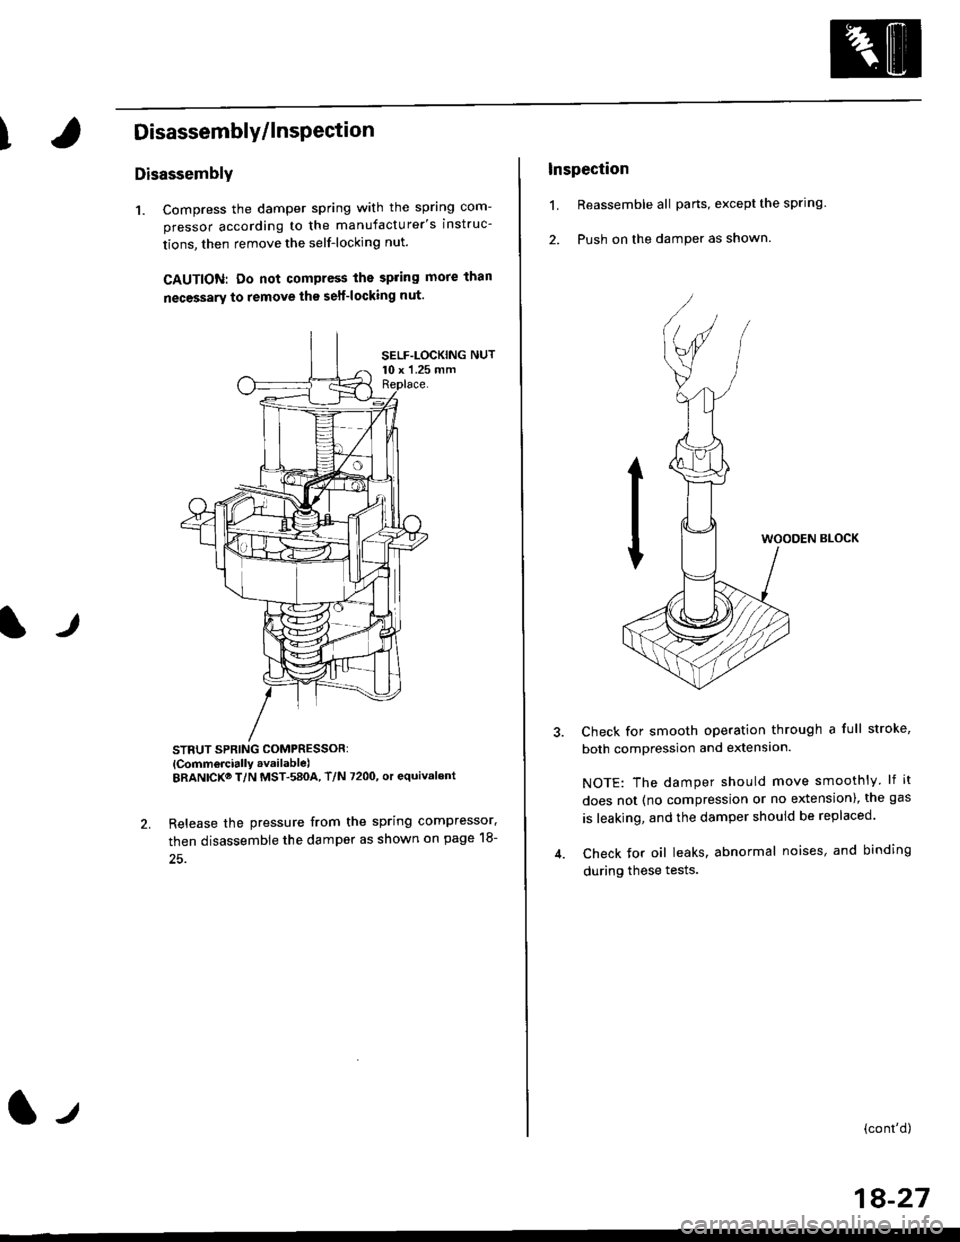 HONDA CIVIC 1999 6.G Workshop Manual IDisassembly/lnsPection
lr
Disassembly
1. Compress the damper spring with the spring com-
pressor according to the manufacturers instruc-
tions, then remove the self-locking nut.
GAUTION: Do not comp